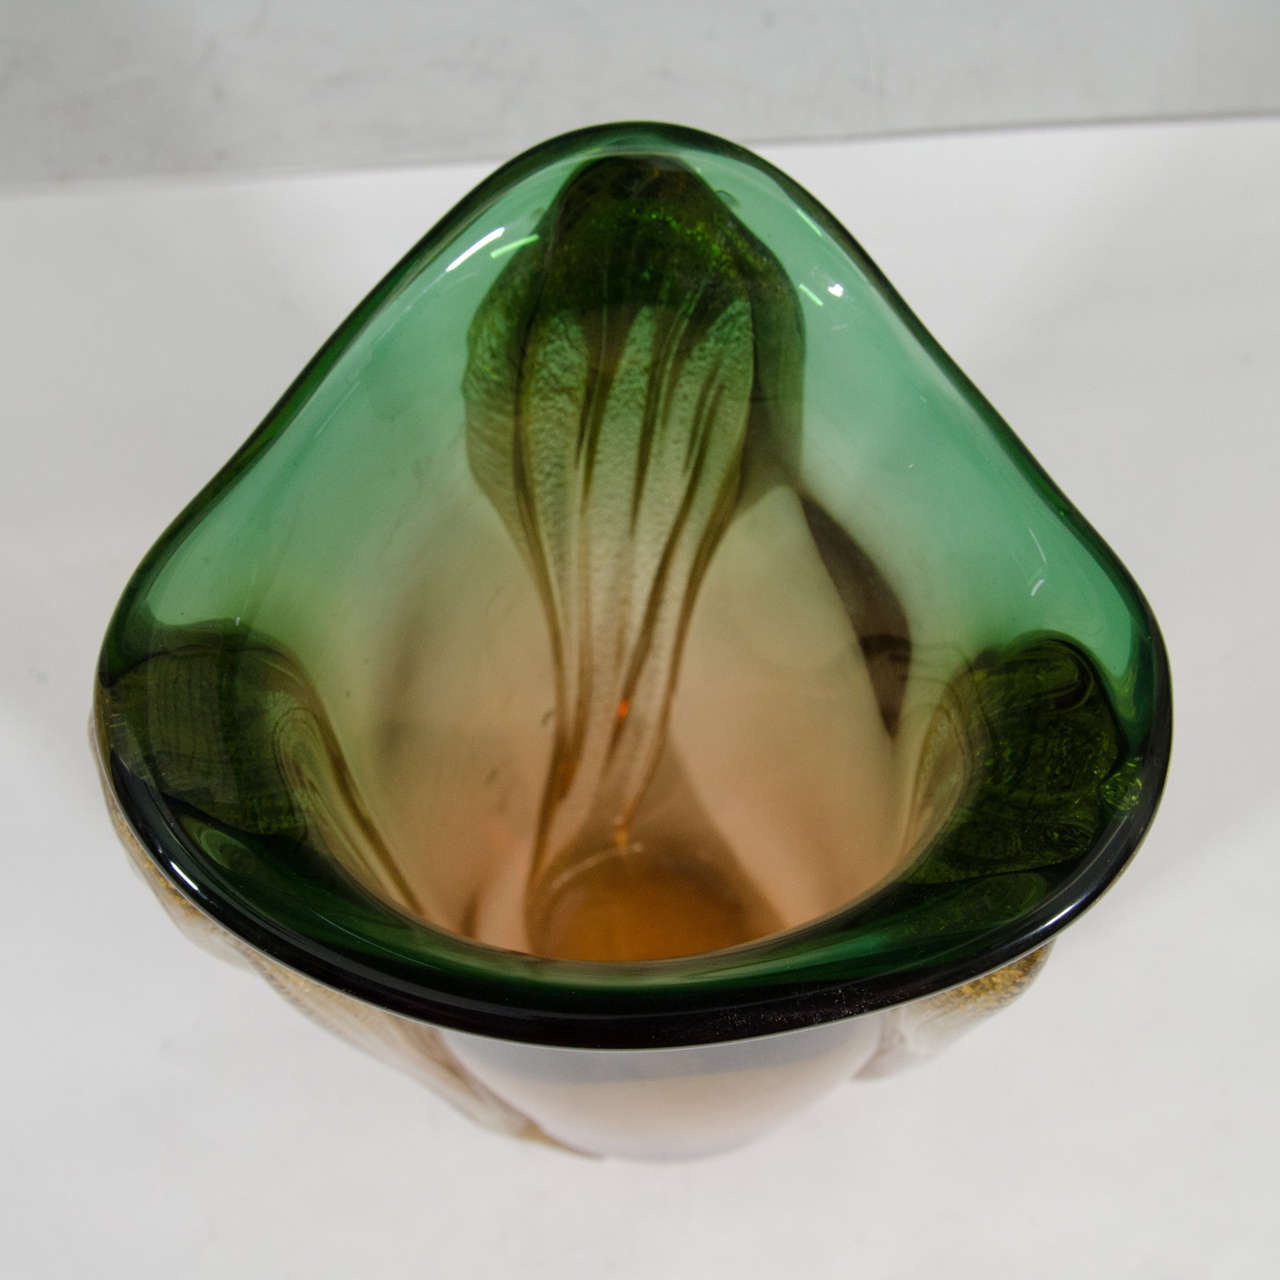 Italian Midcentury Murano Glass Vase in Green and Amber with Gold Leaf